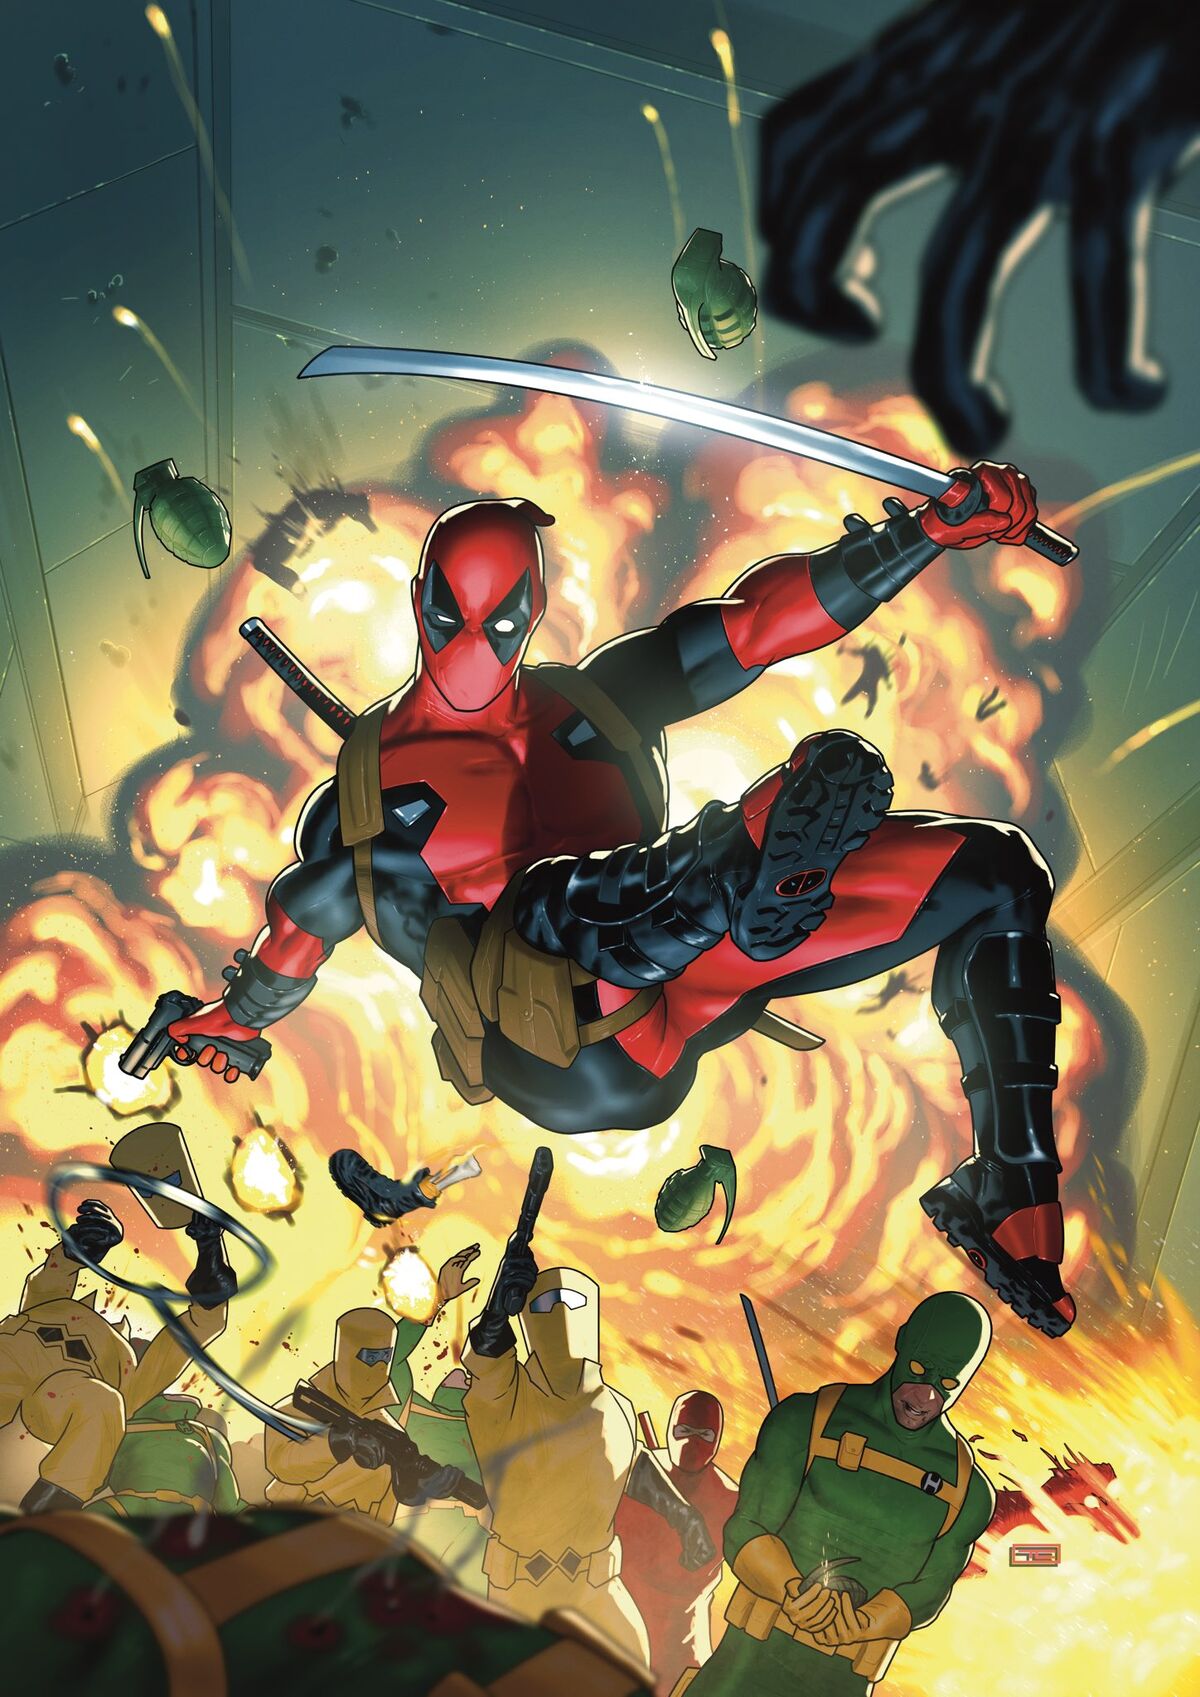 https://static.wikia.nocookie.net/marveldatabase/images/a/a1/Deadpool_Vol_10_1_Textless.jpg/revision/latest/scale-to-width-down/1200?cb=20231219070549